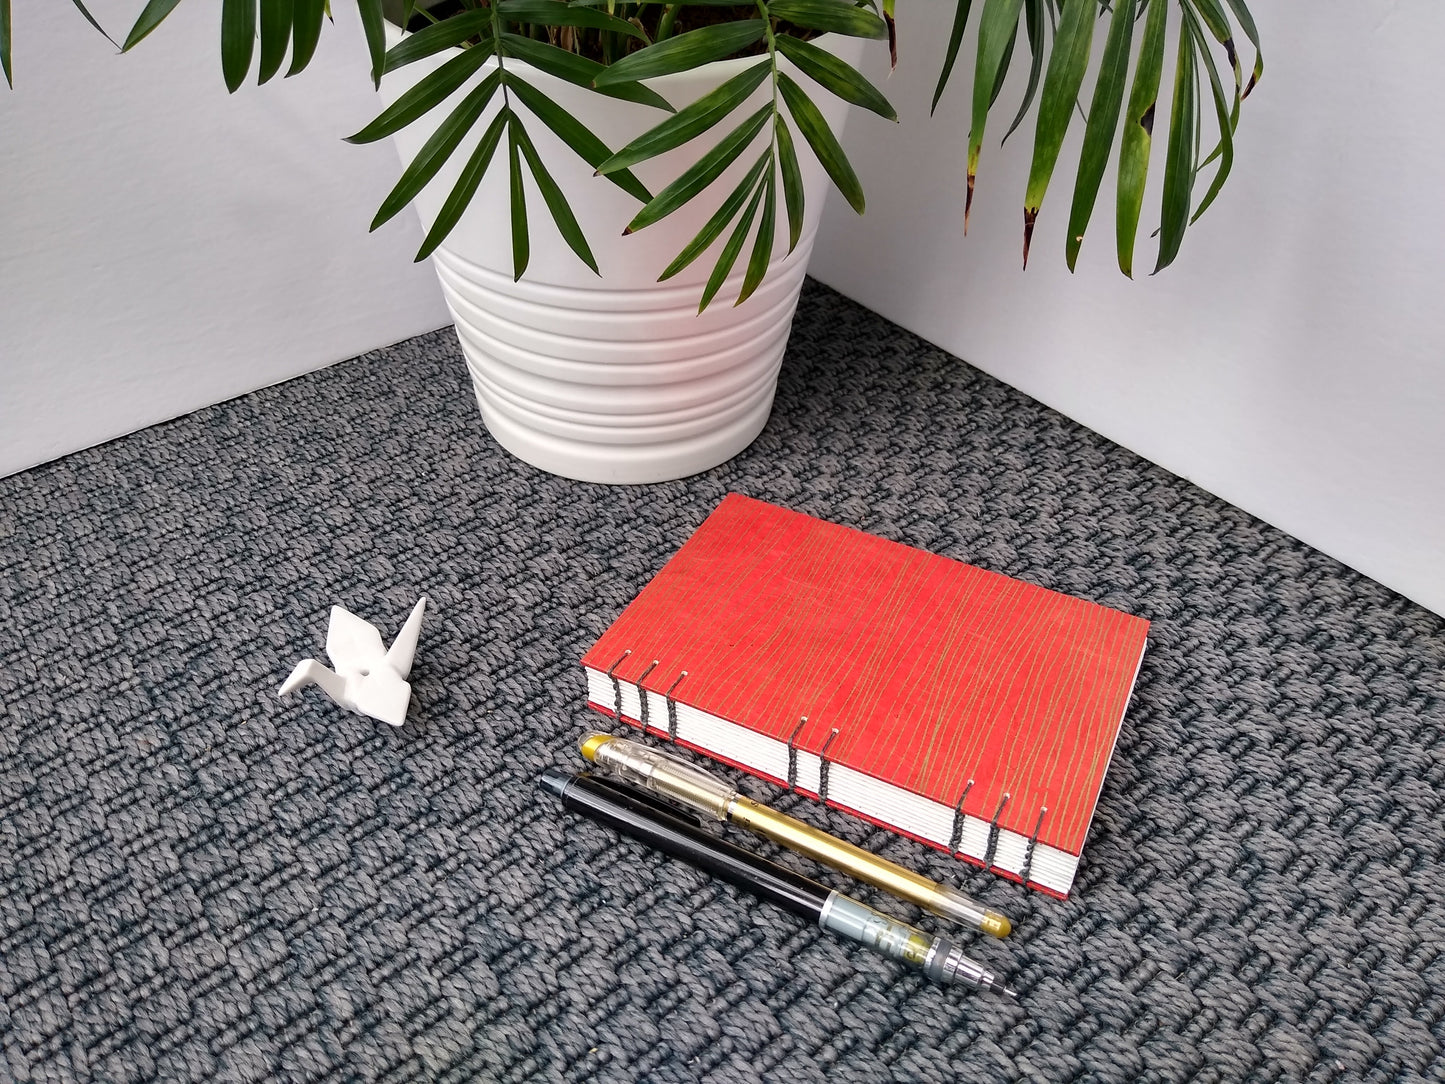 A handmade journal laying on a grey carpet beside a potted plant, a ceramic crane, a gold pen, and a black mechanical pencil. The cover of the journal is red with wavy horizontal gold lines. It is angled to show the open spine, stitched together with grey thread.